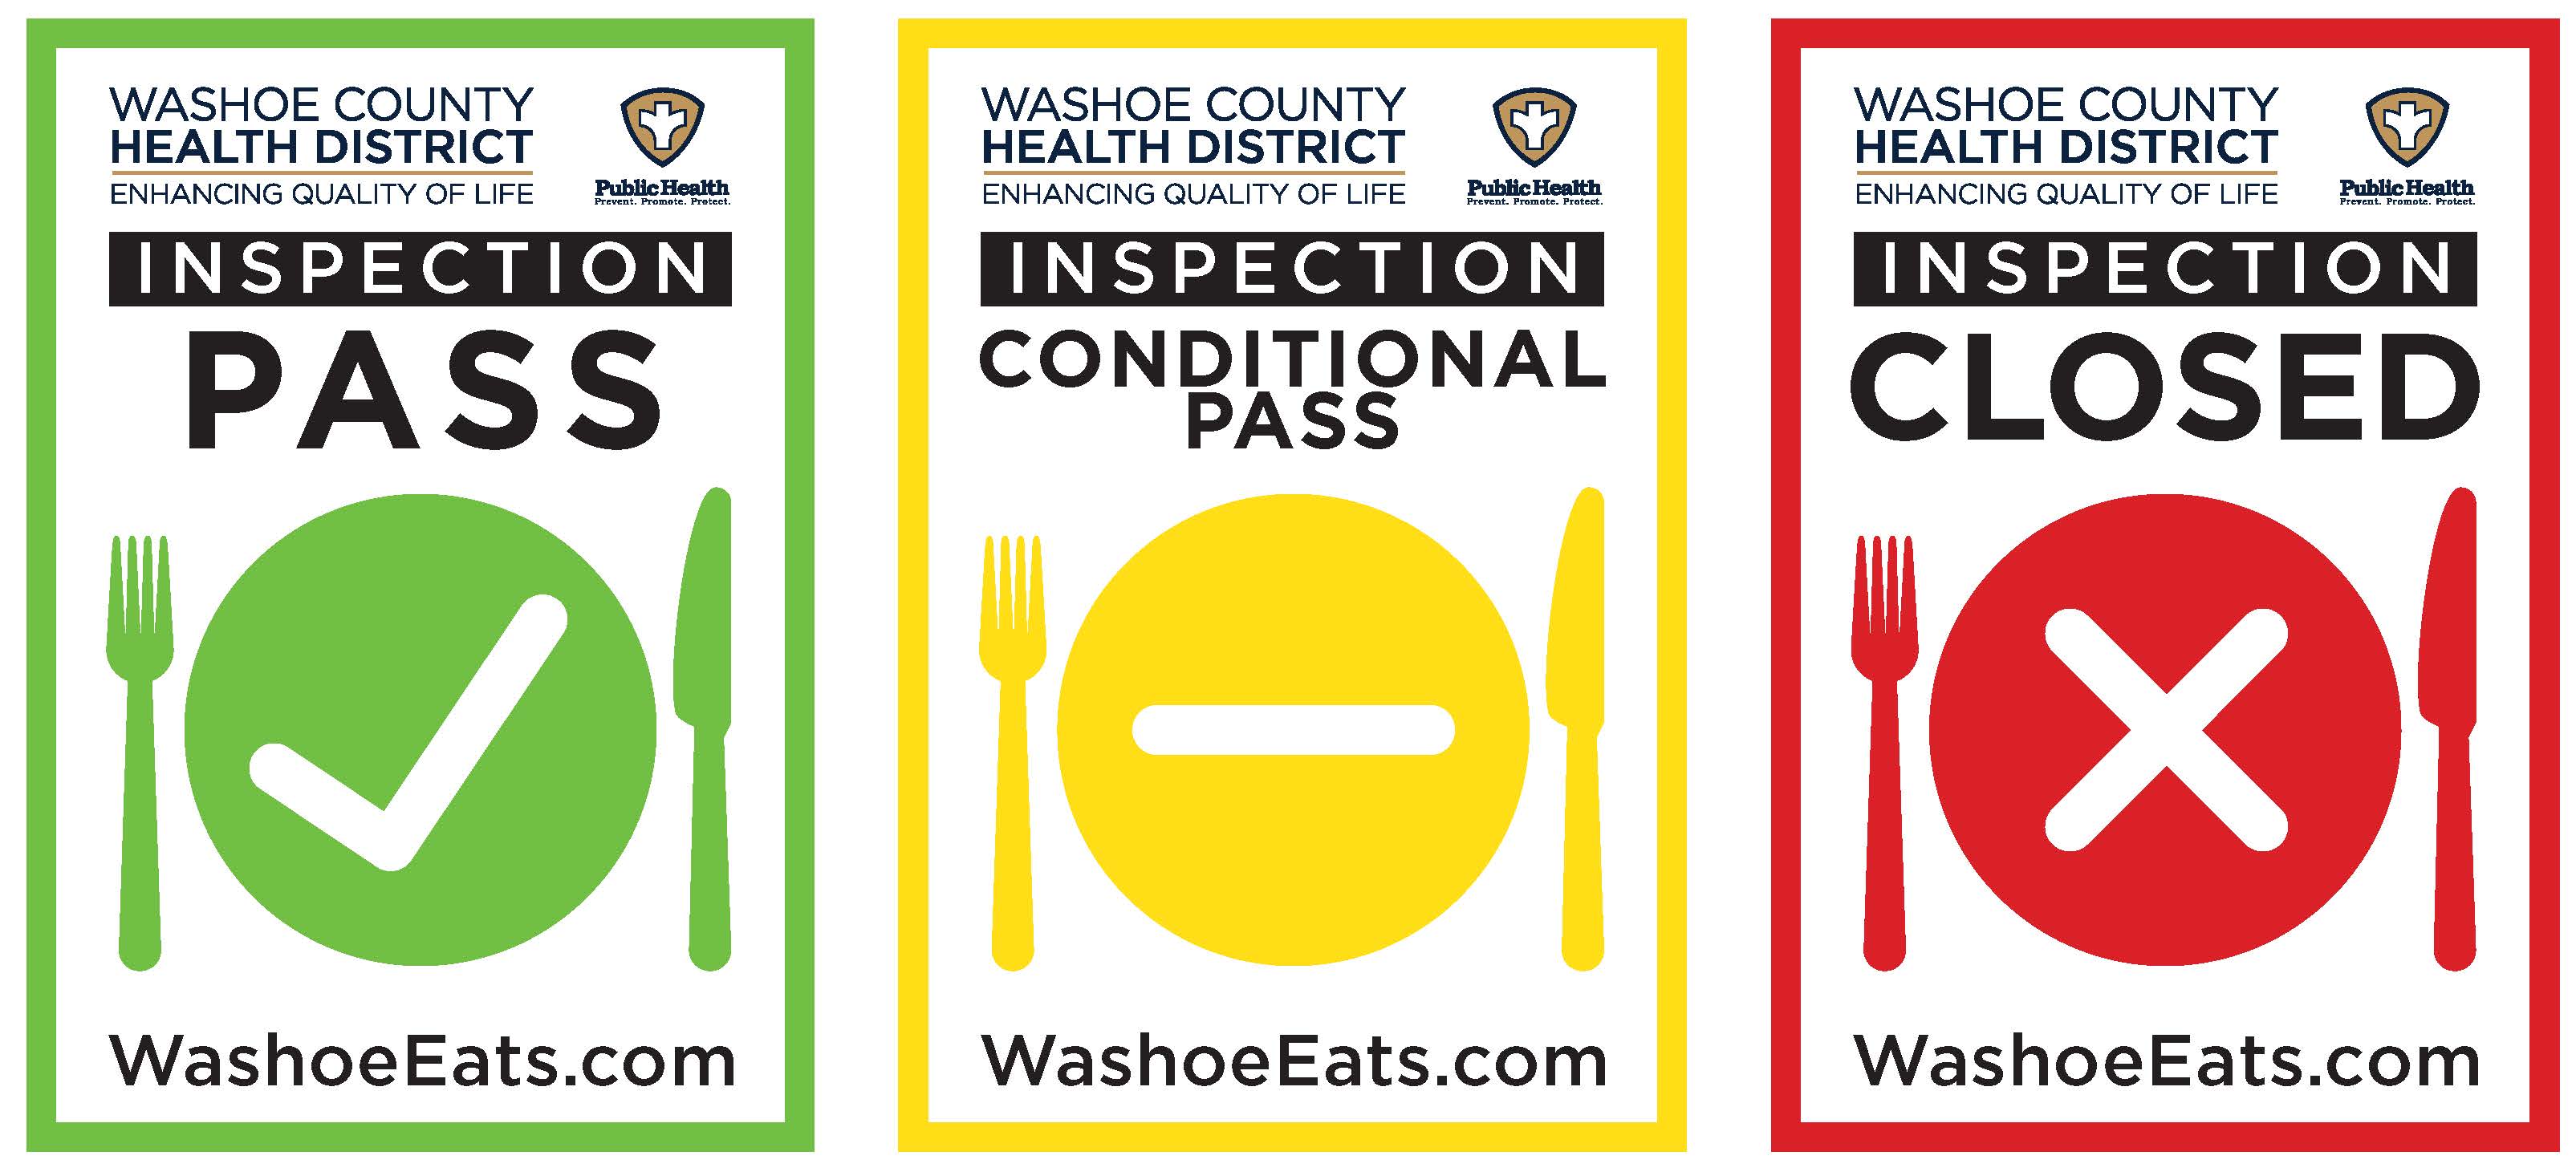 green-yellow-red for inspection scores